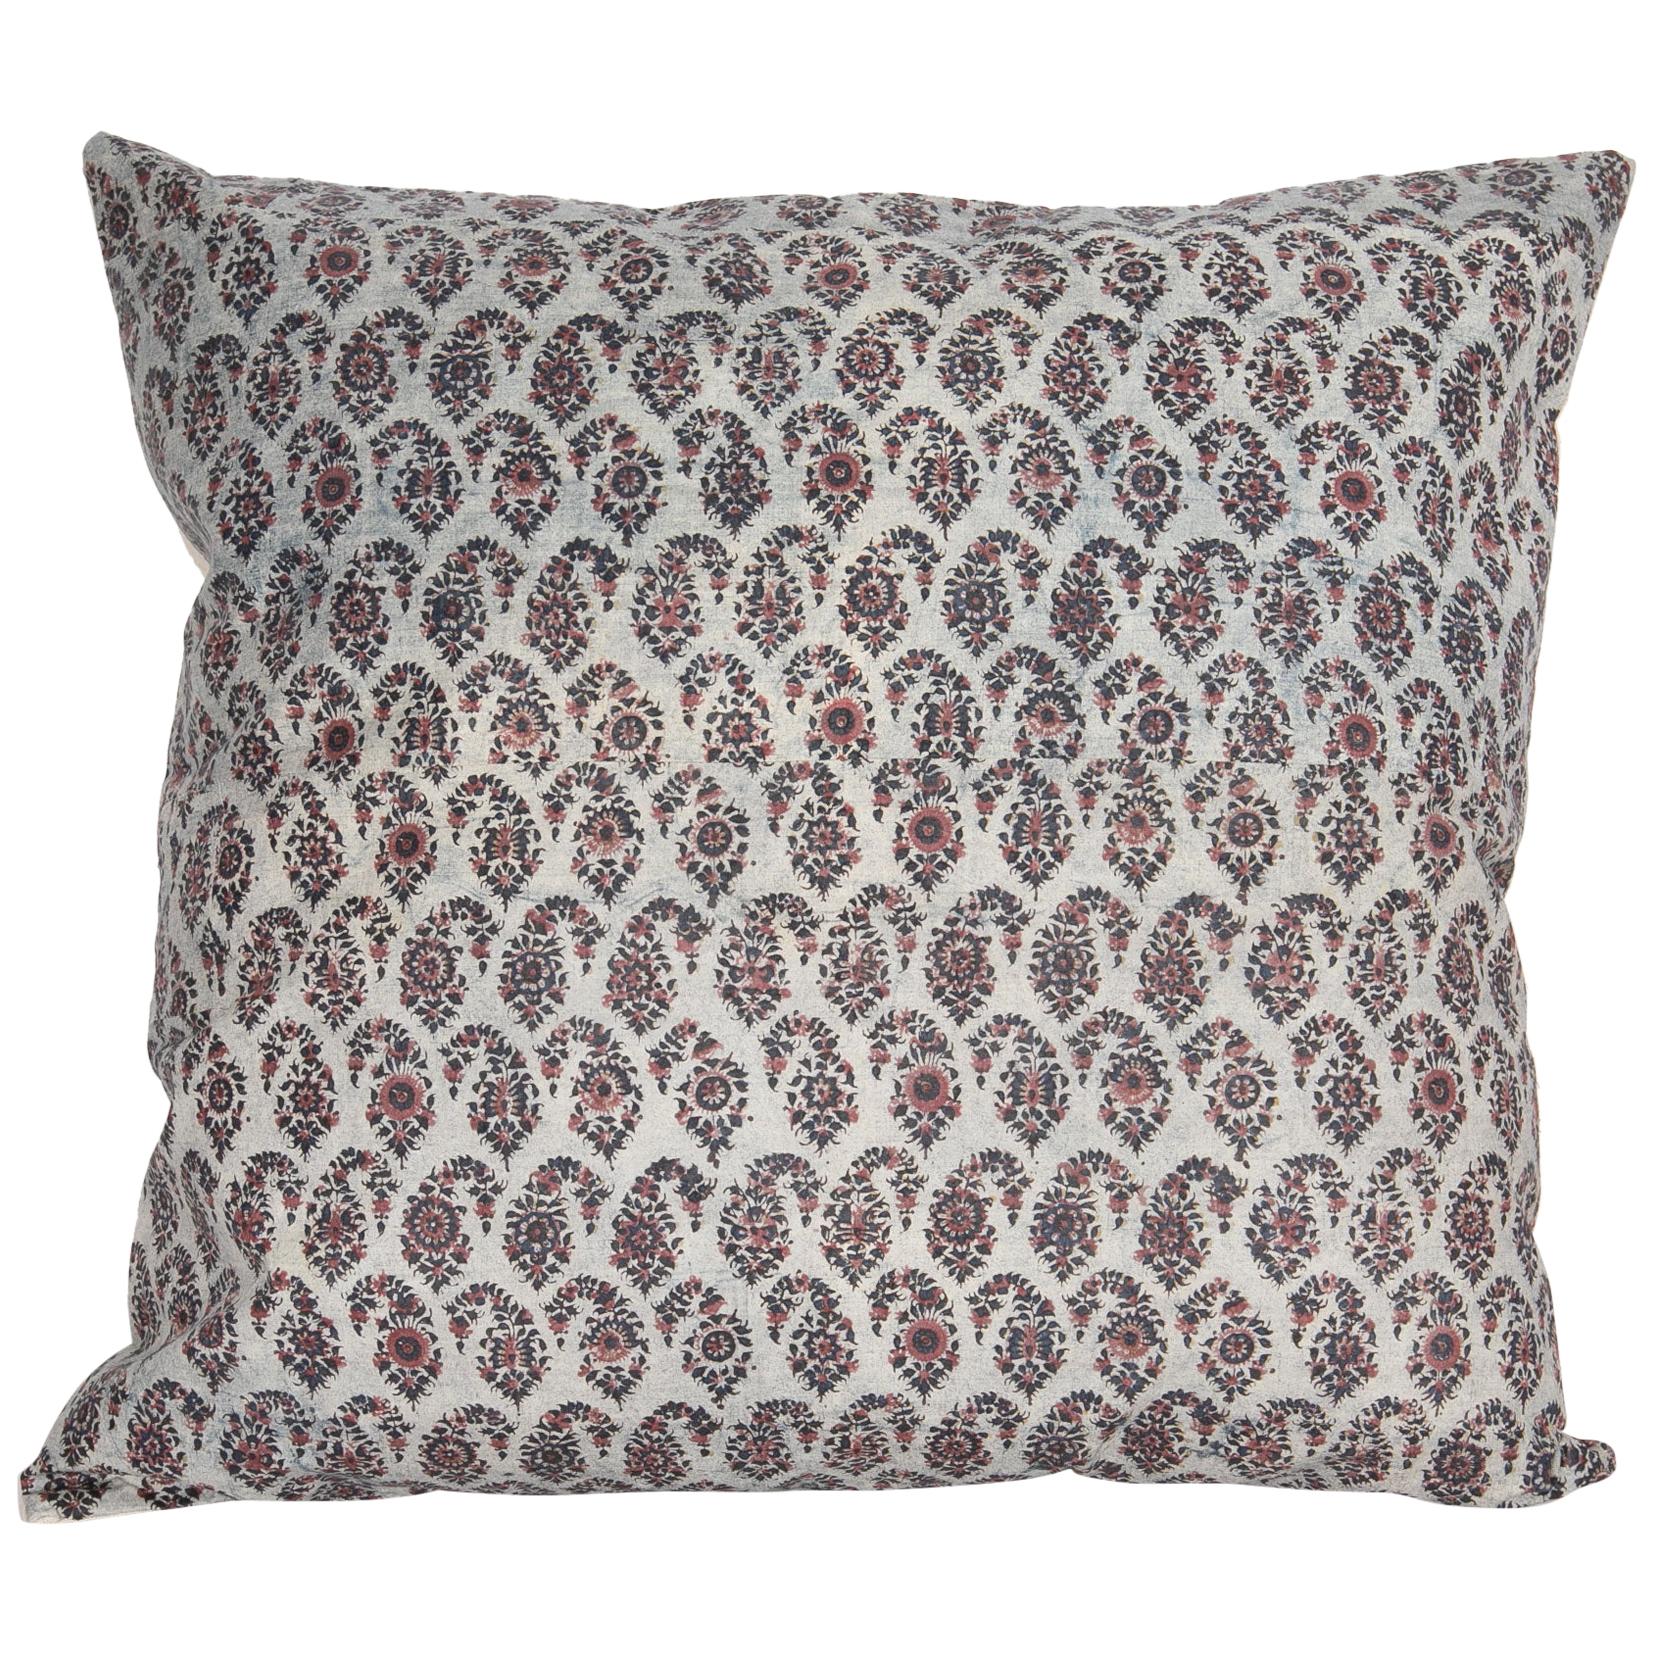 Pillow Case Fashioned from an Antique Indian Qalamkar Panel, Late 19th Century For Sale